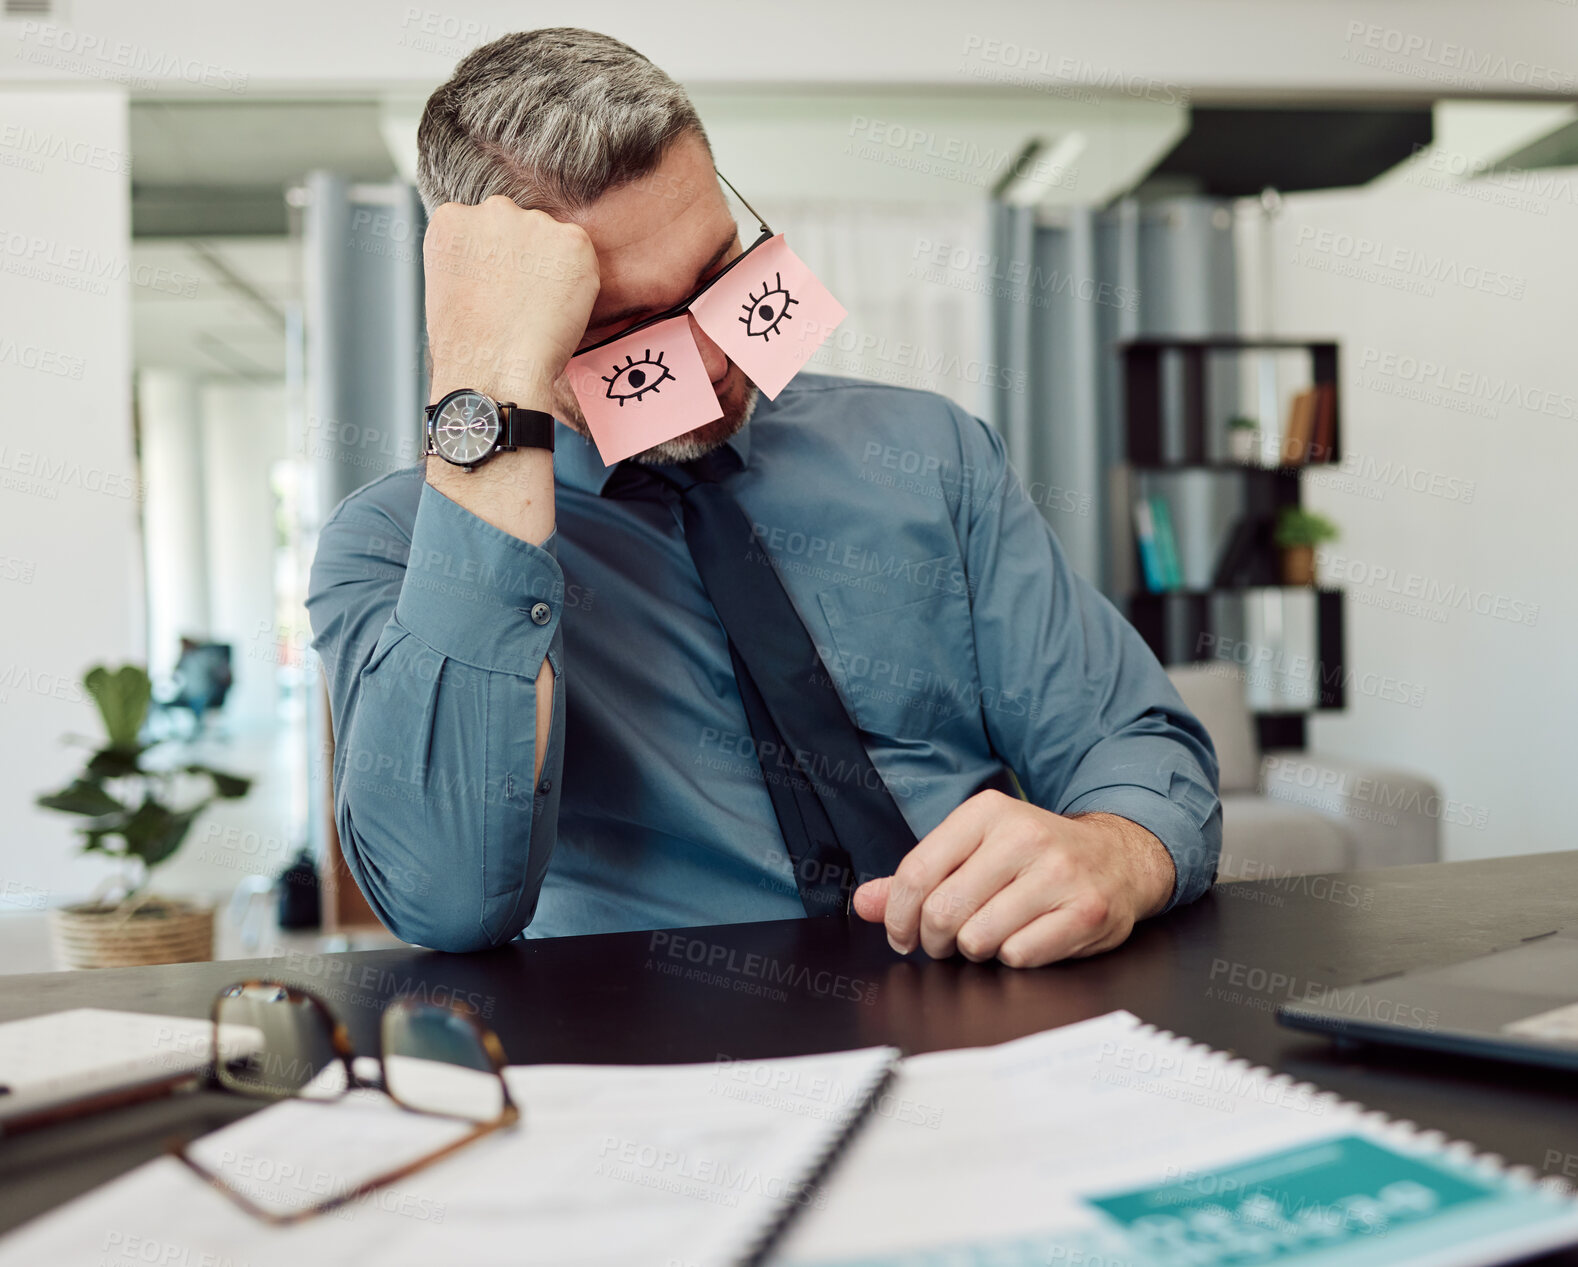 Buy stock photo Tired, sticky notes and businessman sleeping in his office with a burnout, exhaustion or overworked. Overtime, rest and professional mature male lawyer taking nap on his lunch break in the workplace.